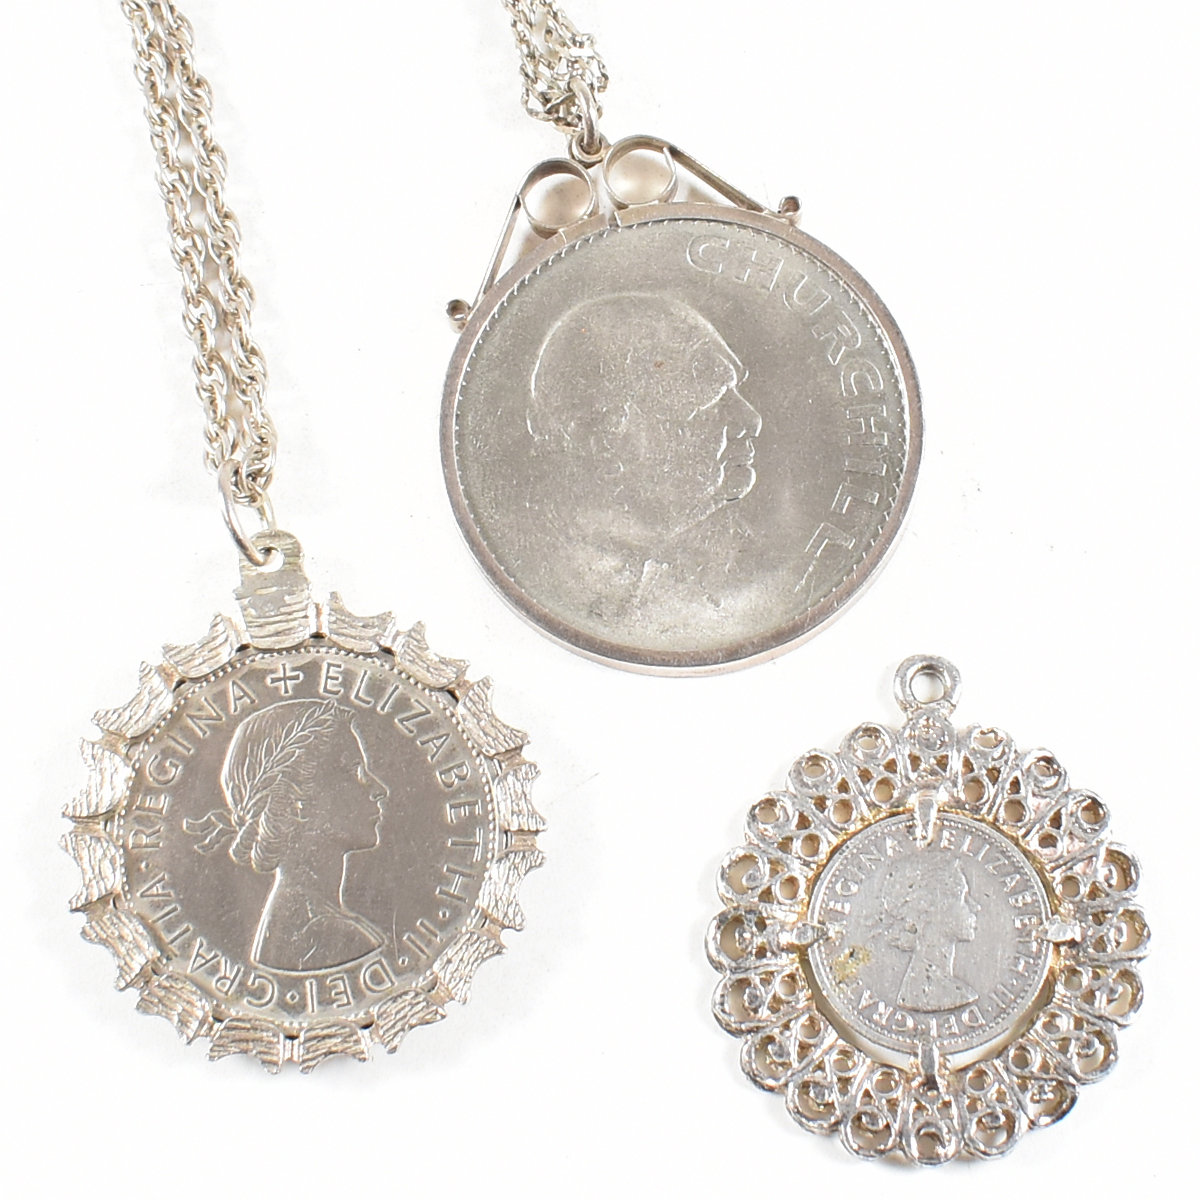 COLLECTION OF MOUNTED COIN PENDANT NECKLACES & PENDANT